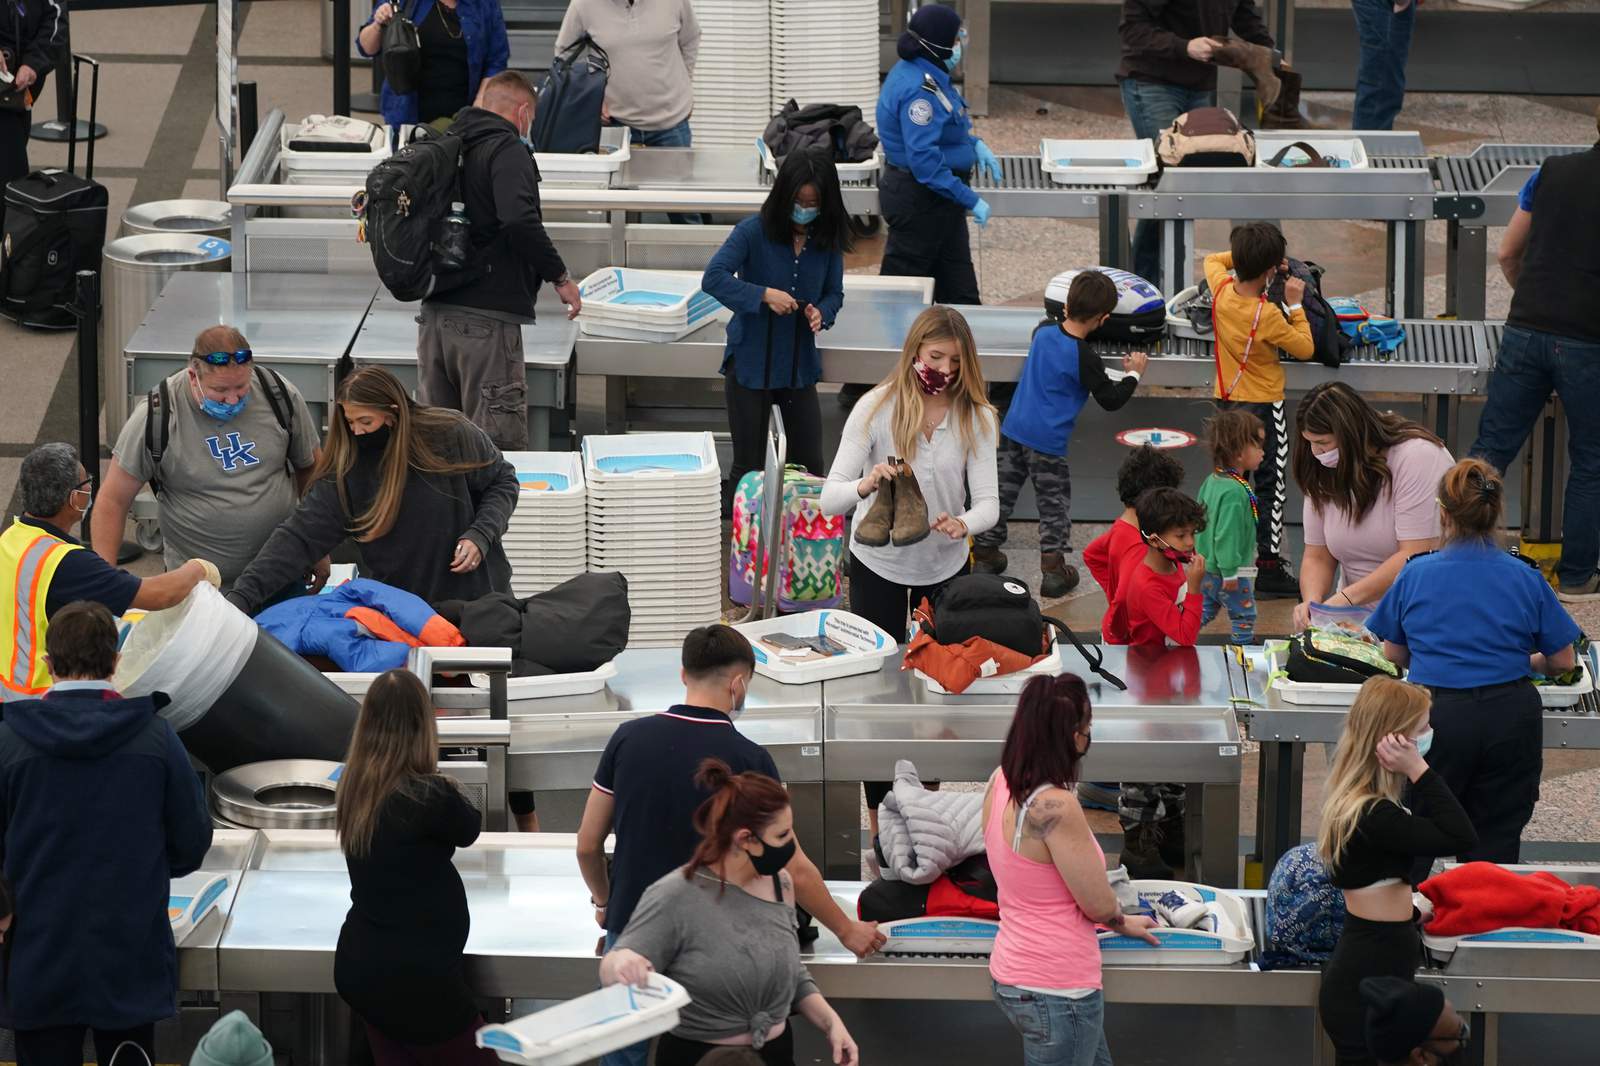 'Mom's worth it': US holiday travel surges despite outbreak